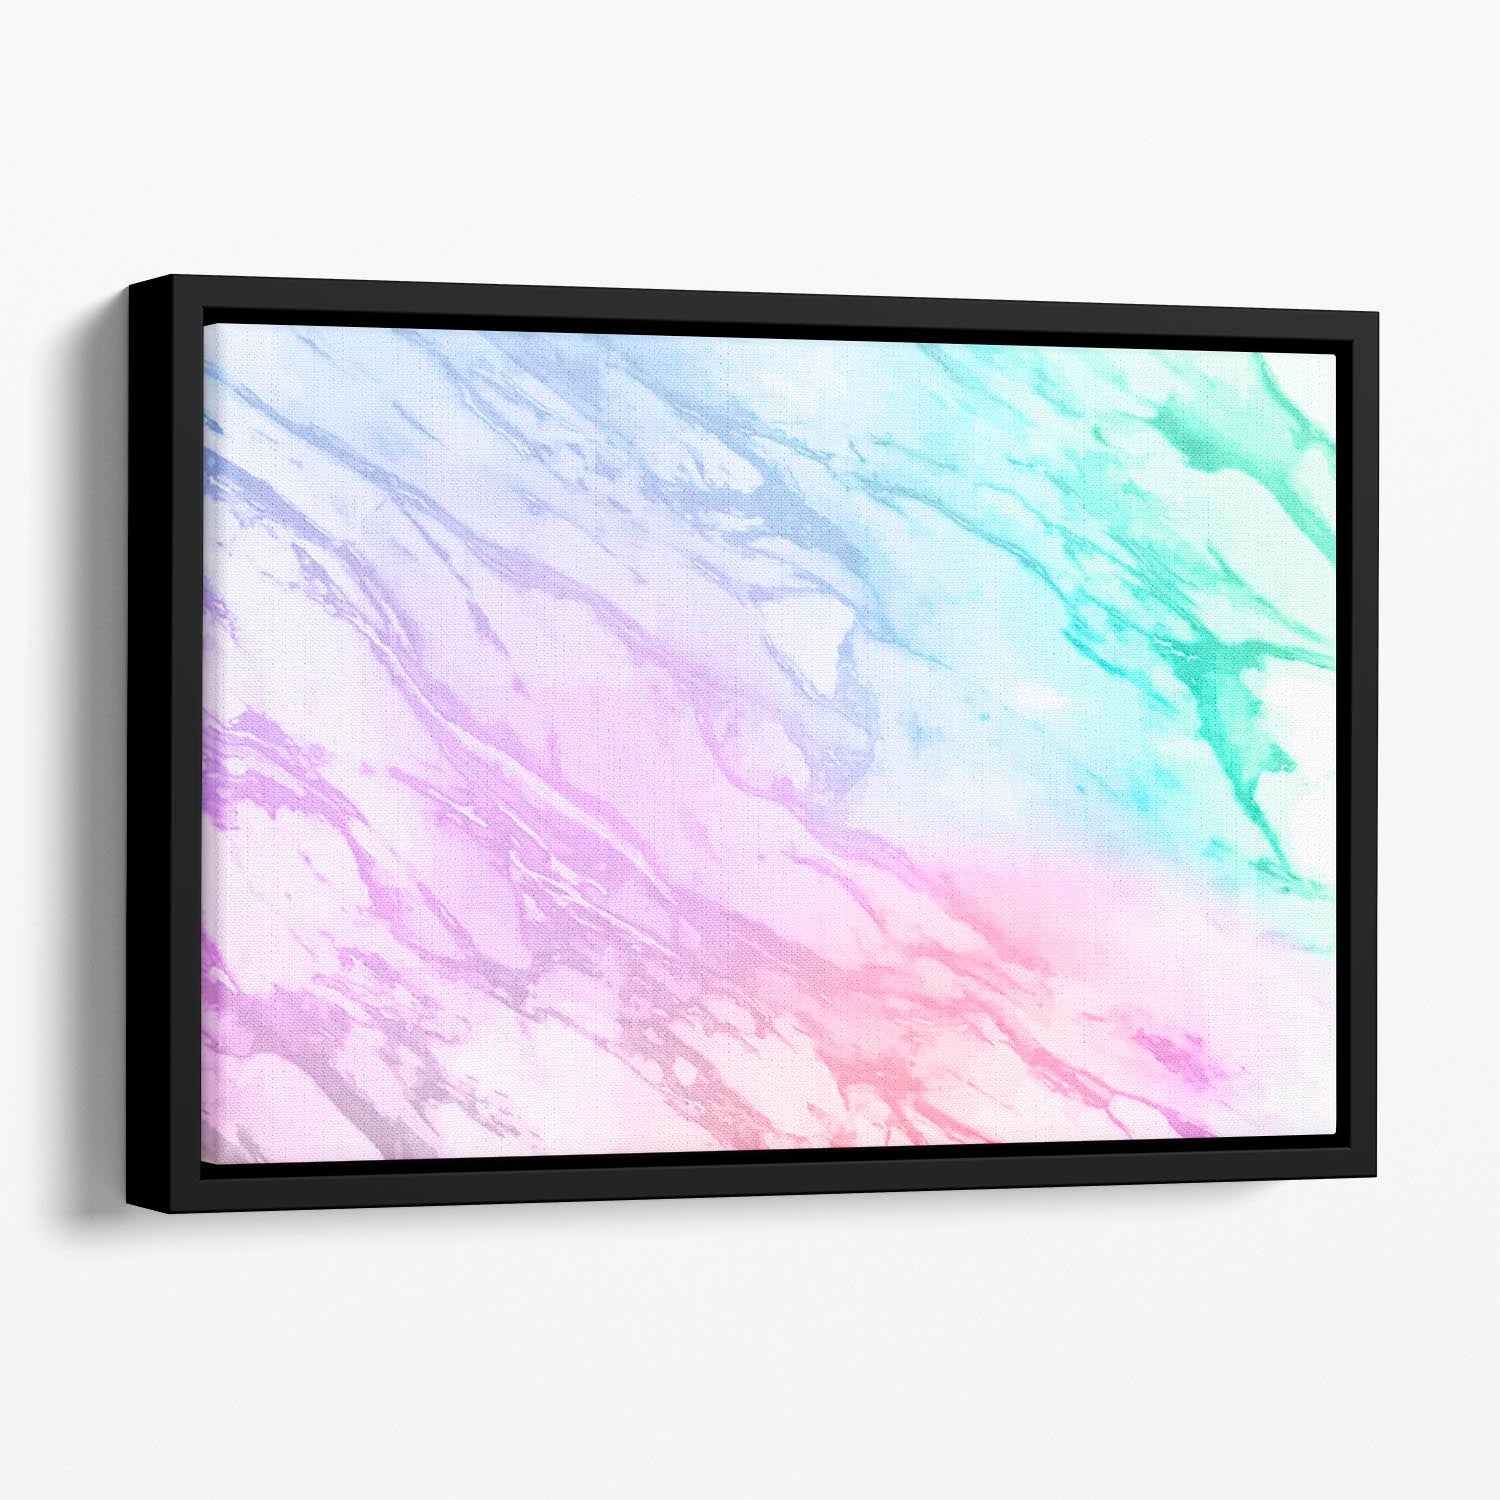 Neon Striped Marble Floating Framed Canvas - Canvas Art Rocks - 1